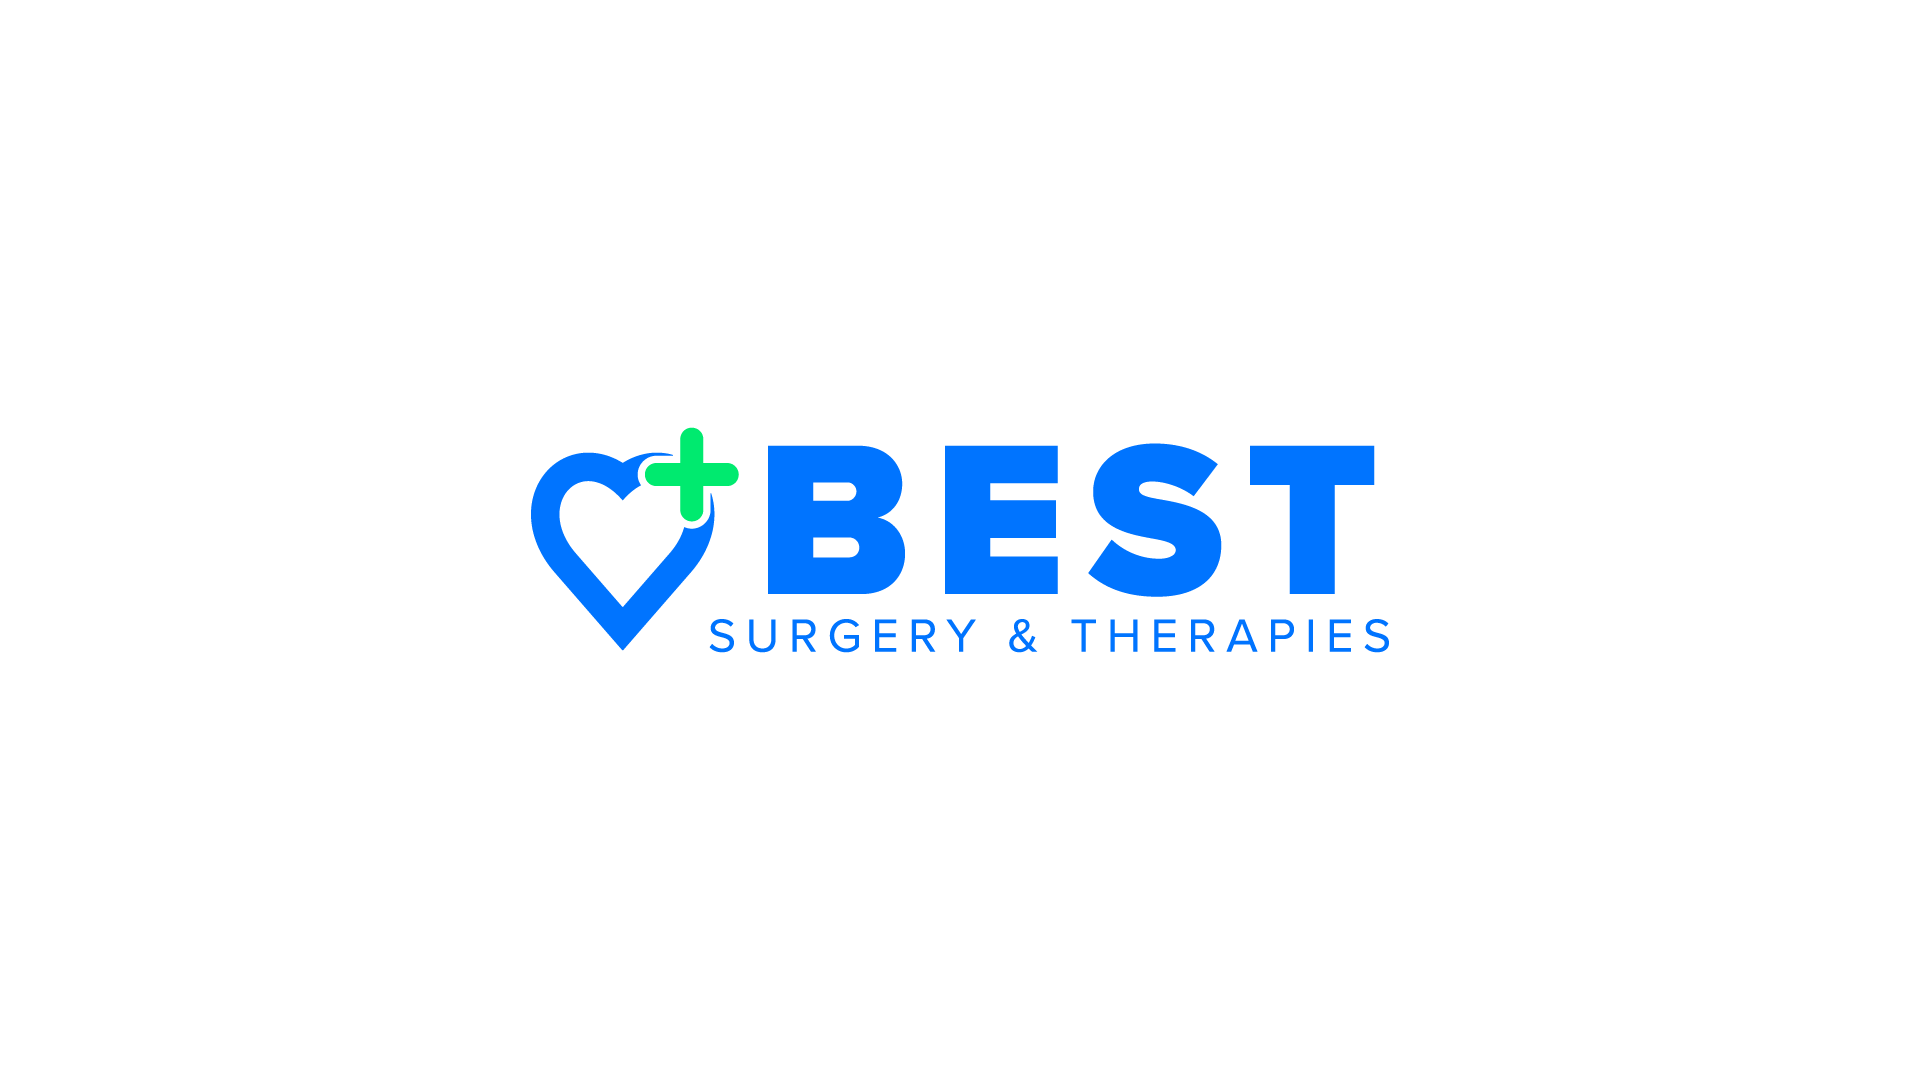 BEST Surgery & Therapies